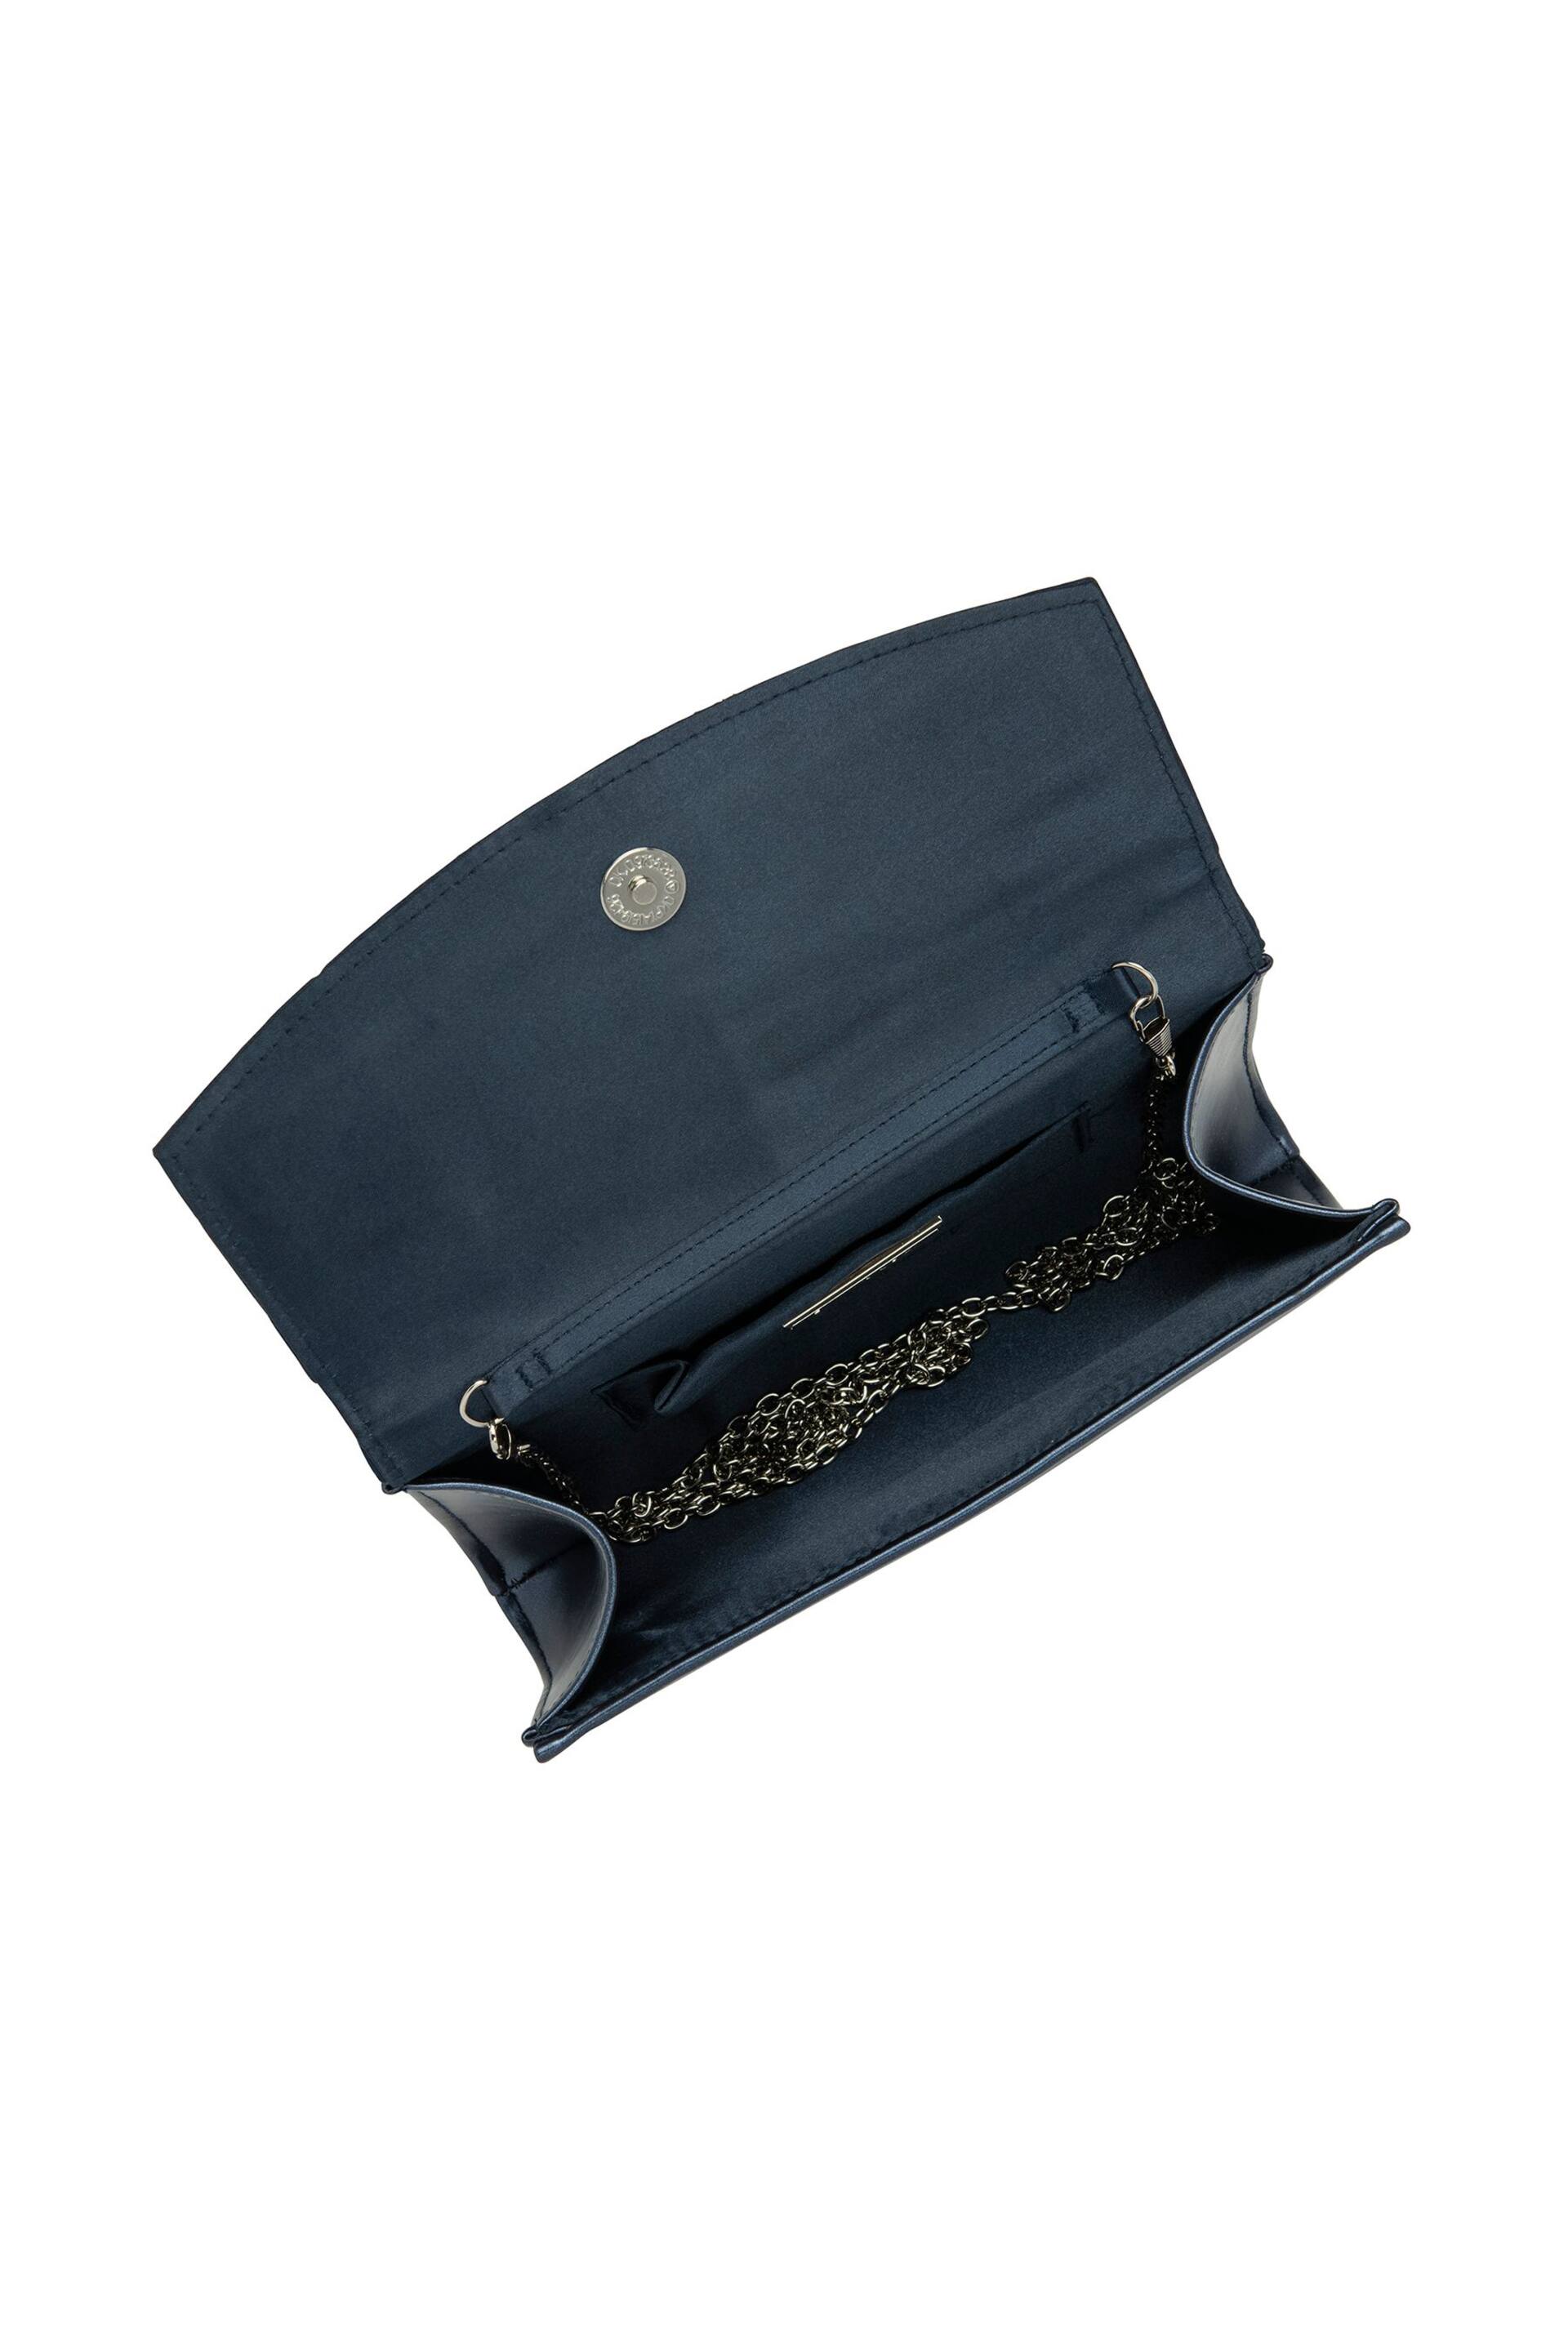 Lotus Blue Clutch Bag With Chain - Image 4 of 4